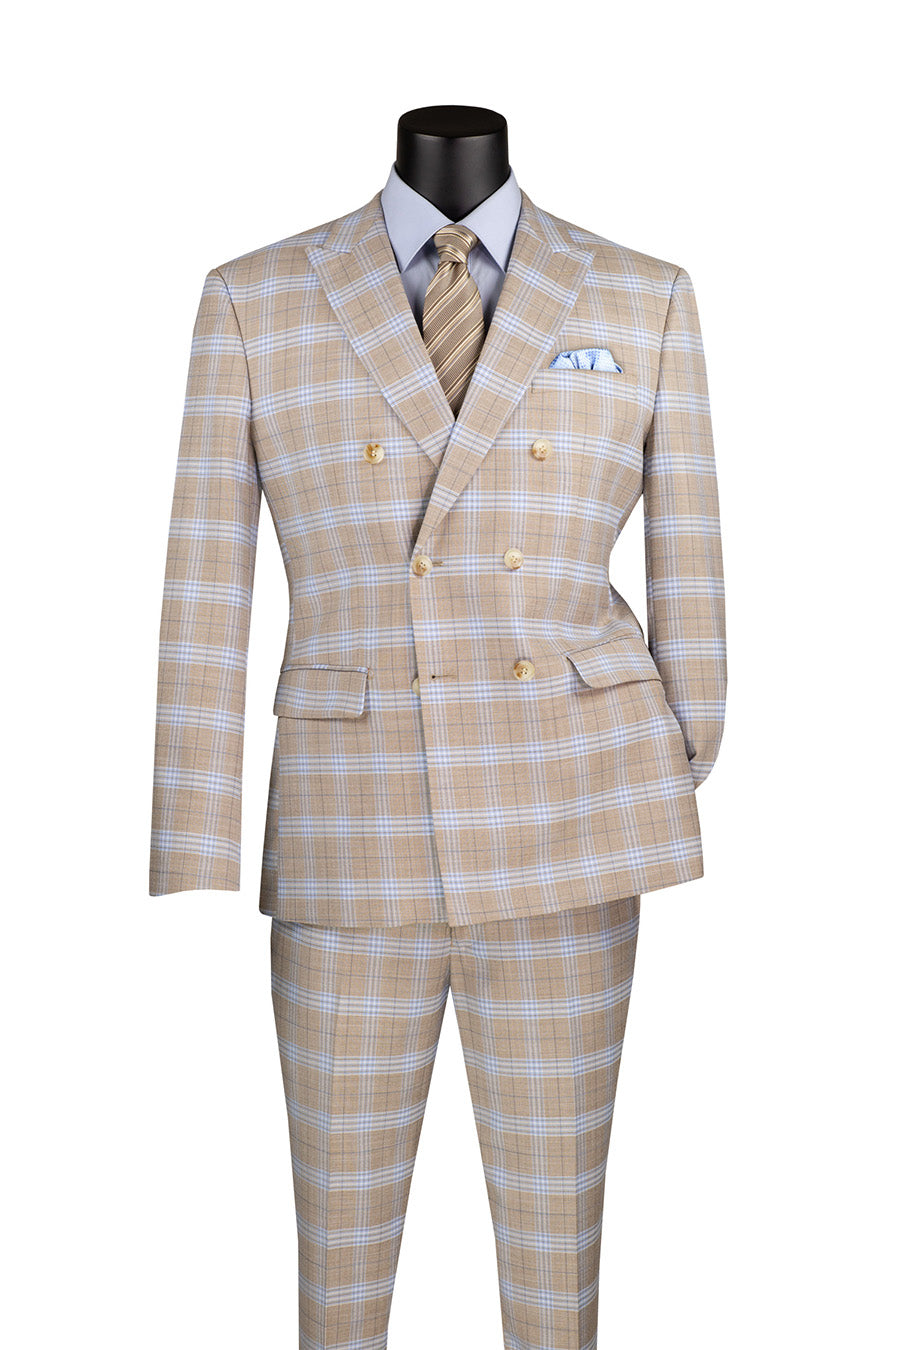 Duke of Windsor Collection - Slim Fit 2 Piece Double Breasted Windowpane Suit in Tan